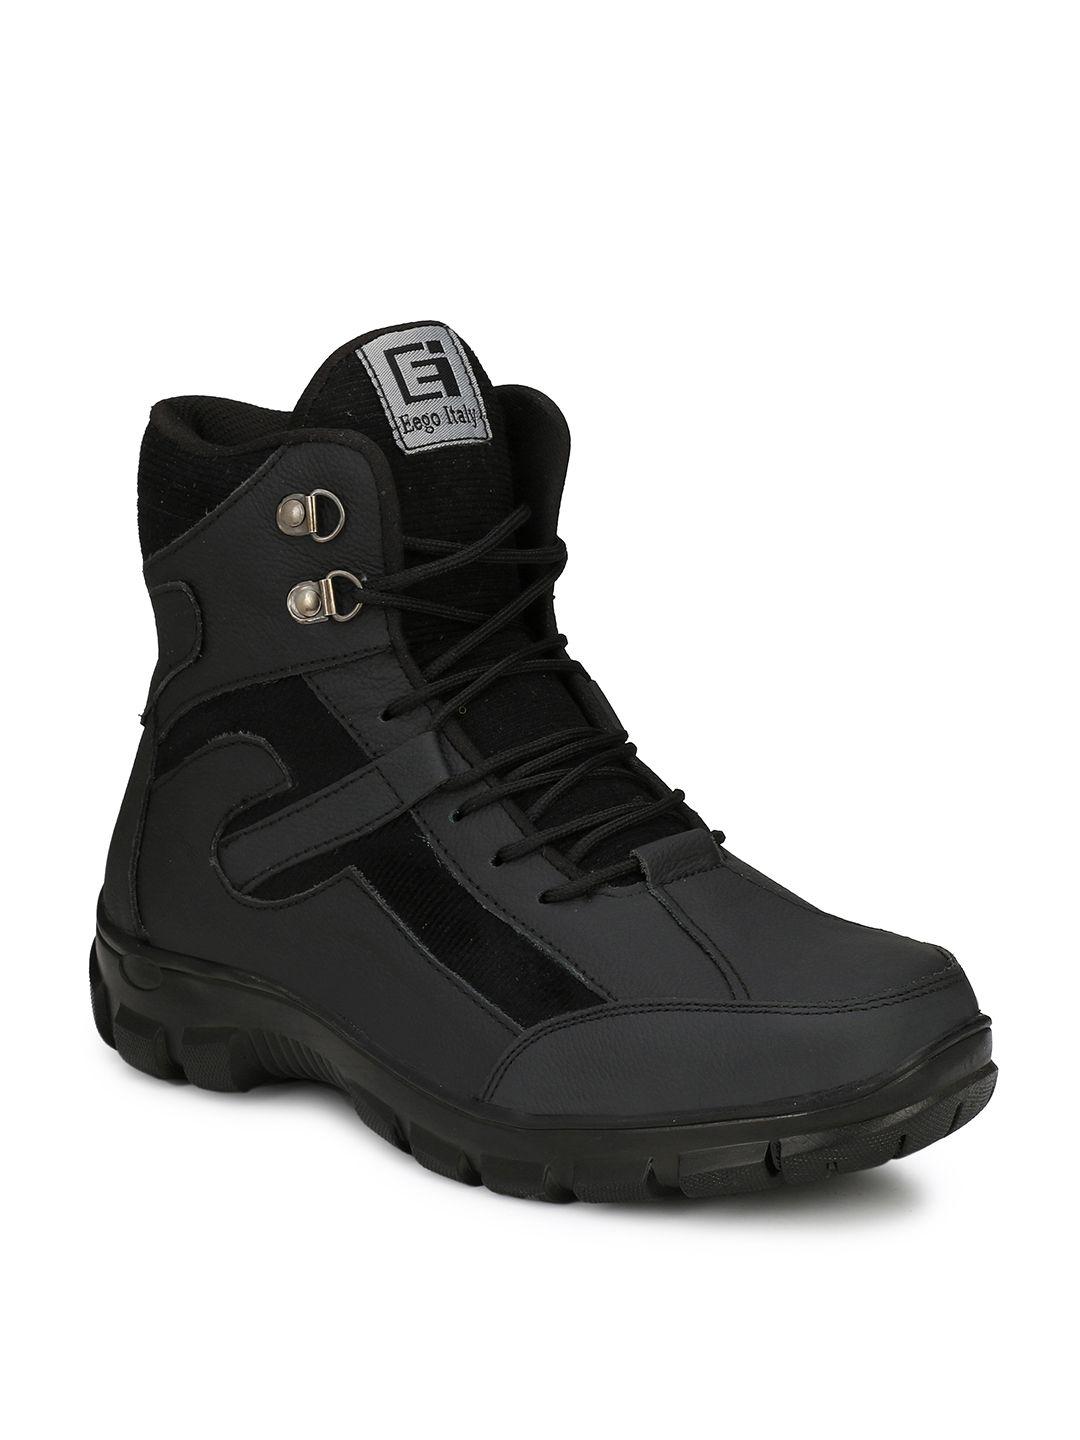 eego italy men black leather high-top trekking shoes